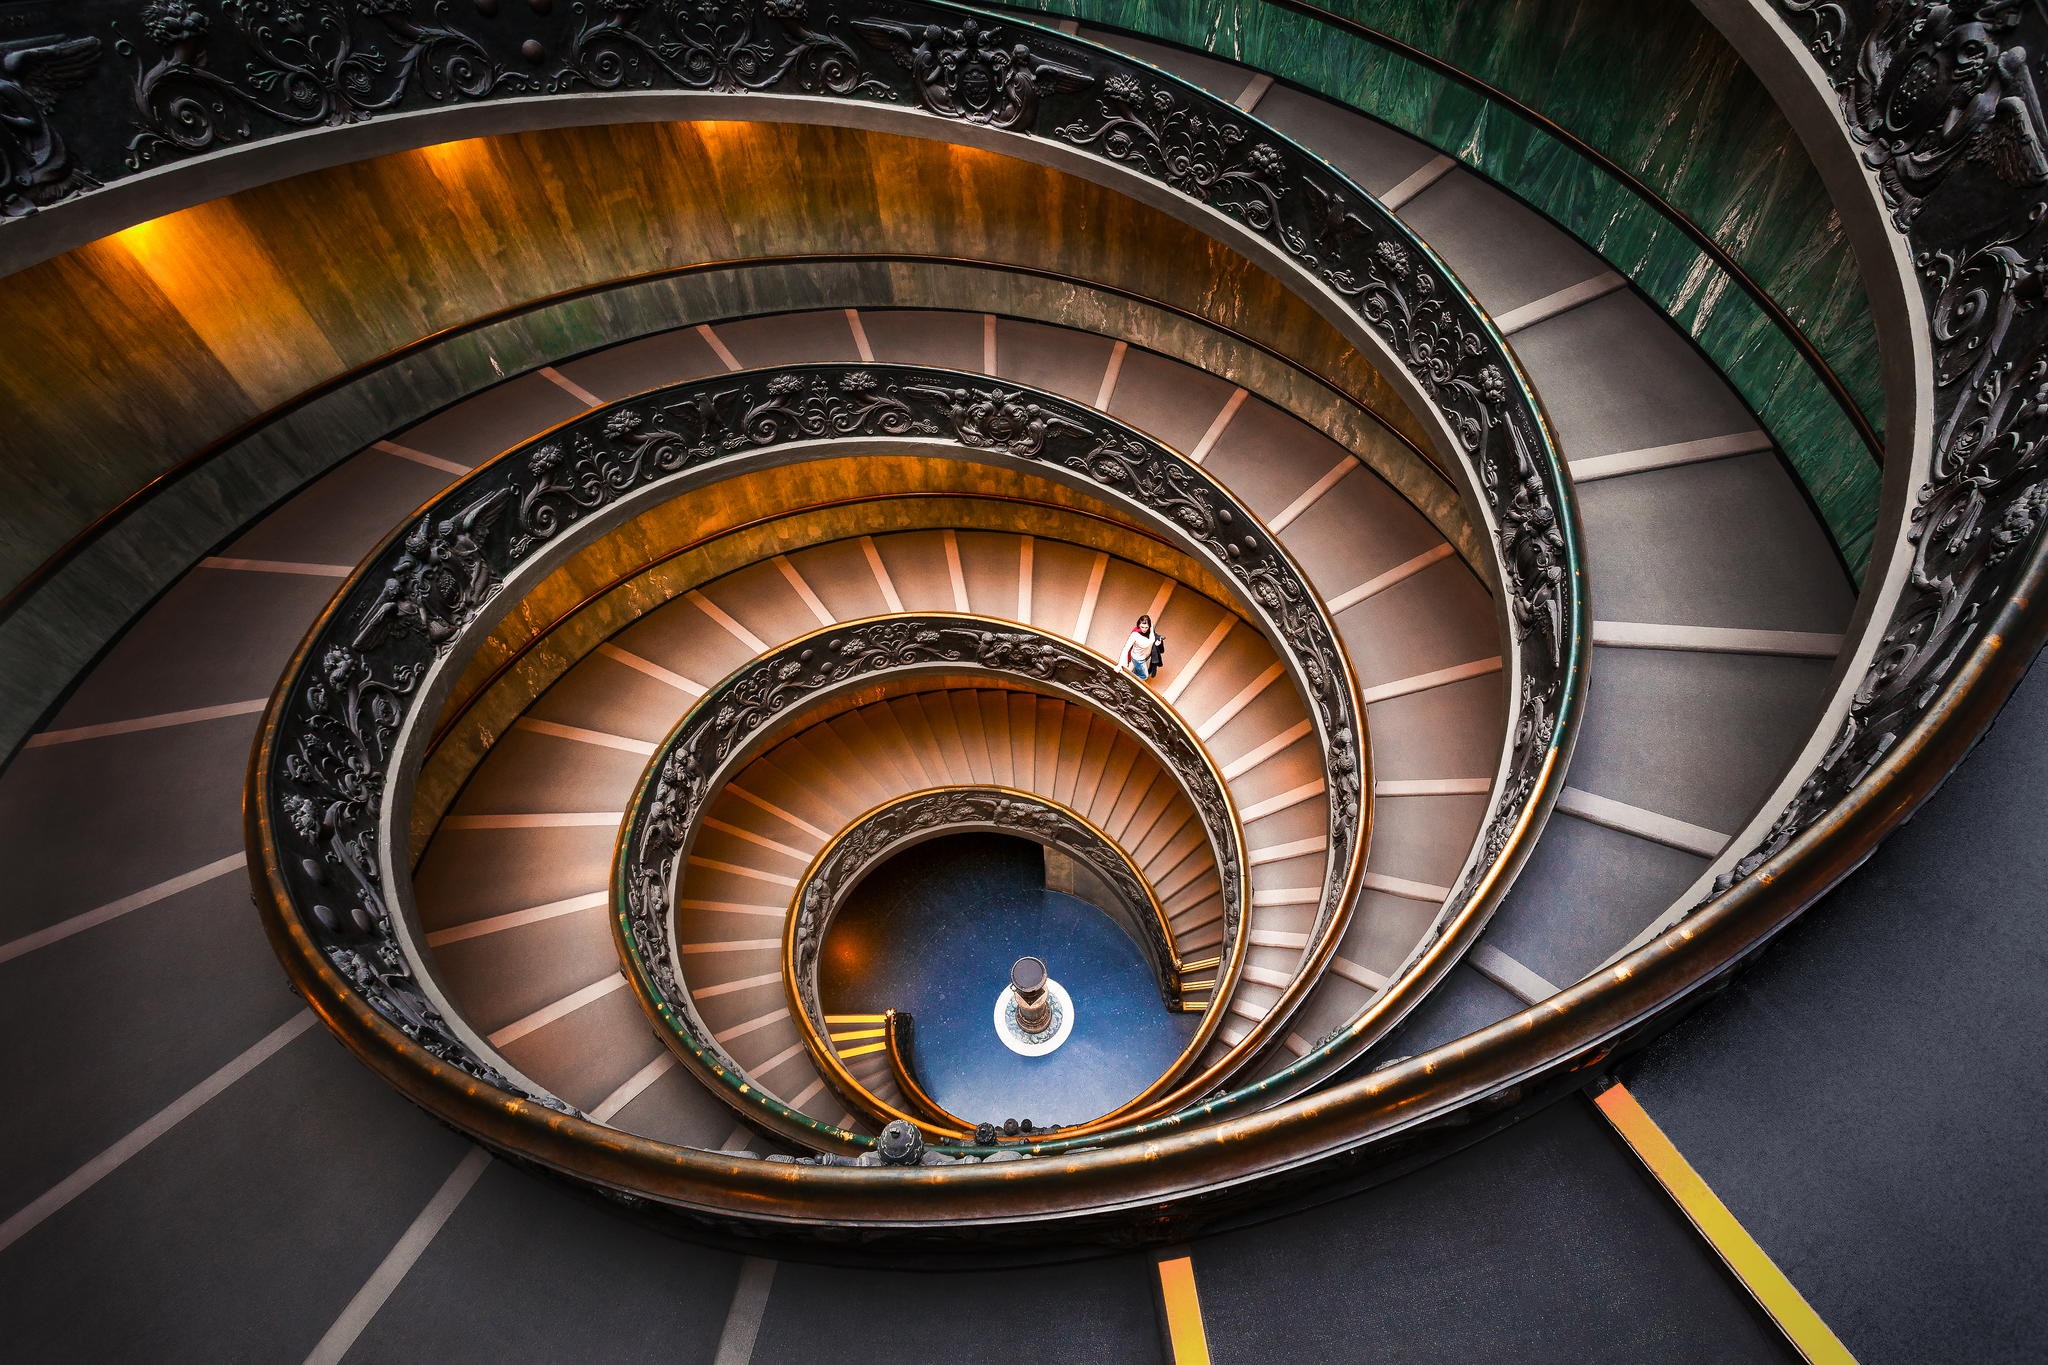 General 2048x1365 architecture stairs Vatican City spiral building indoors